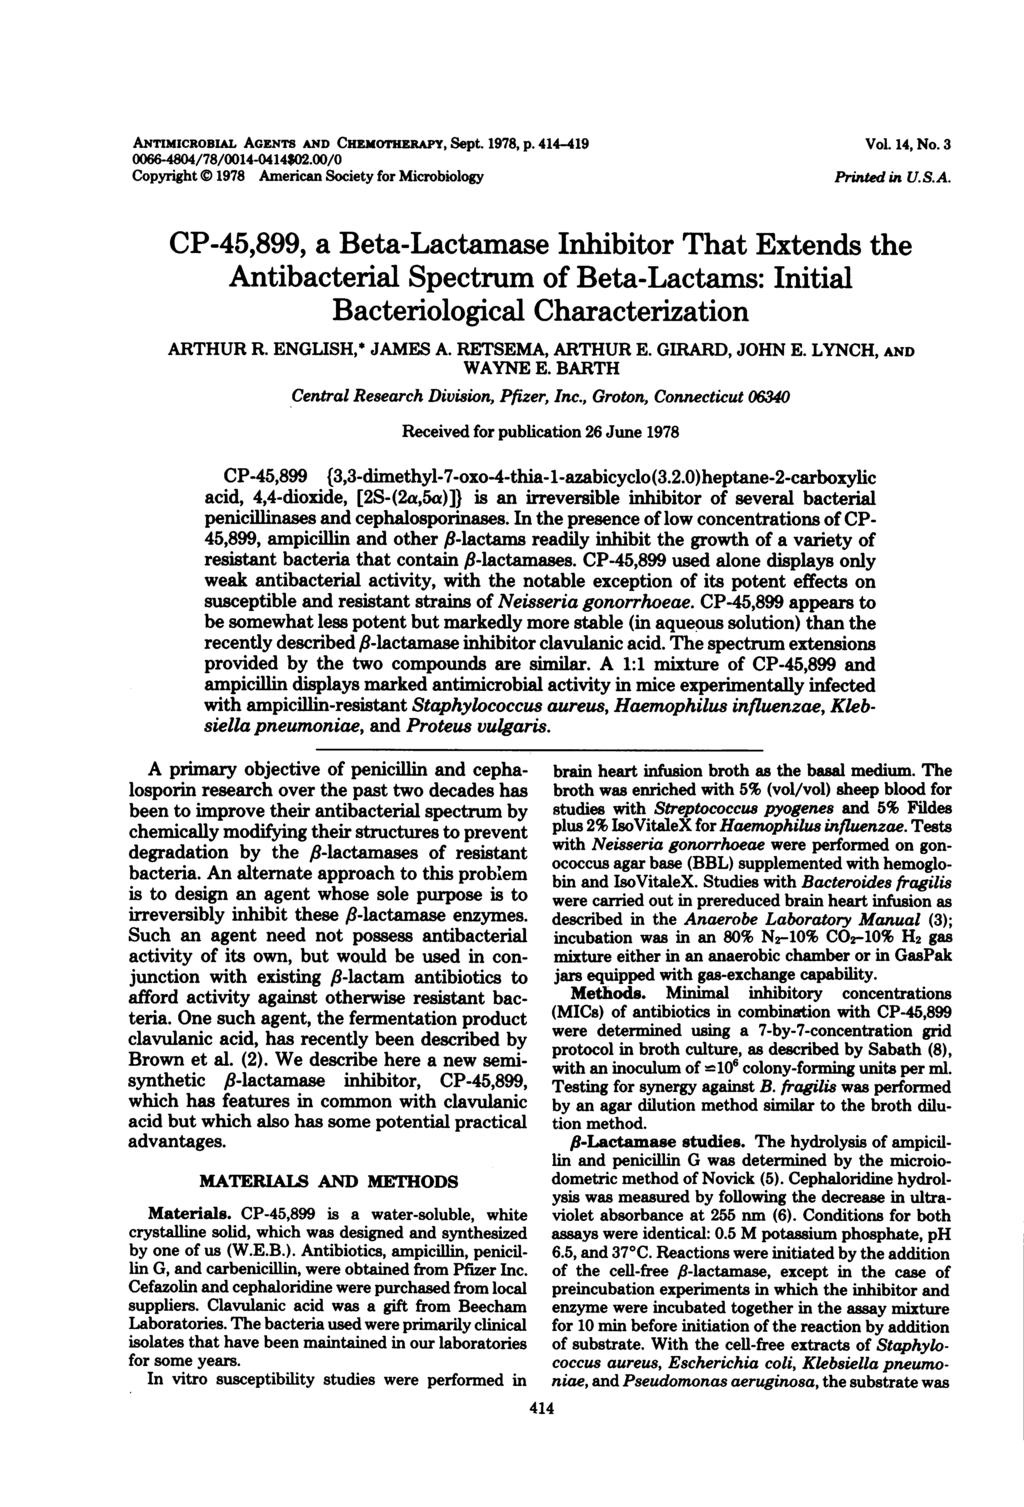 ANTIMICROBIAL AGENTS AND CHEMOTHERAPY, Sept. 1978, p. 414-419 0066-4804/78/0014-0414$02.00/O Copyright X) 1978 American Society for Microbiology Vol. 14, No. 3 Printed in U.S.A. CP-45,899, a Beta-Lactamase Inhibitor That Extends the Antibacterial Spectrum of Beta-Lactams: Initial Bacteriological Characterization ARTHUR R.